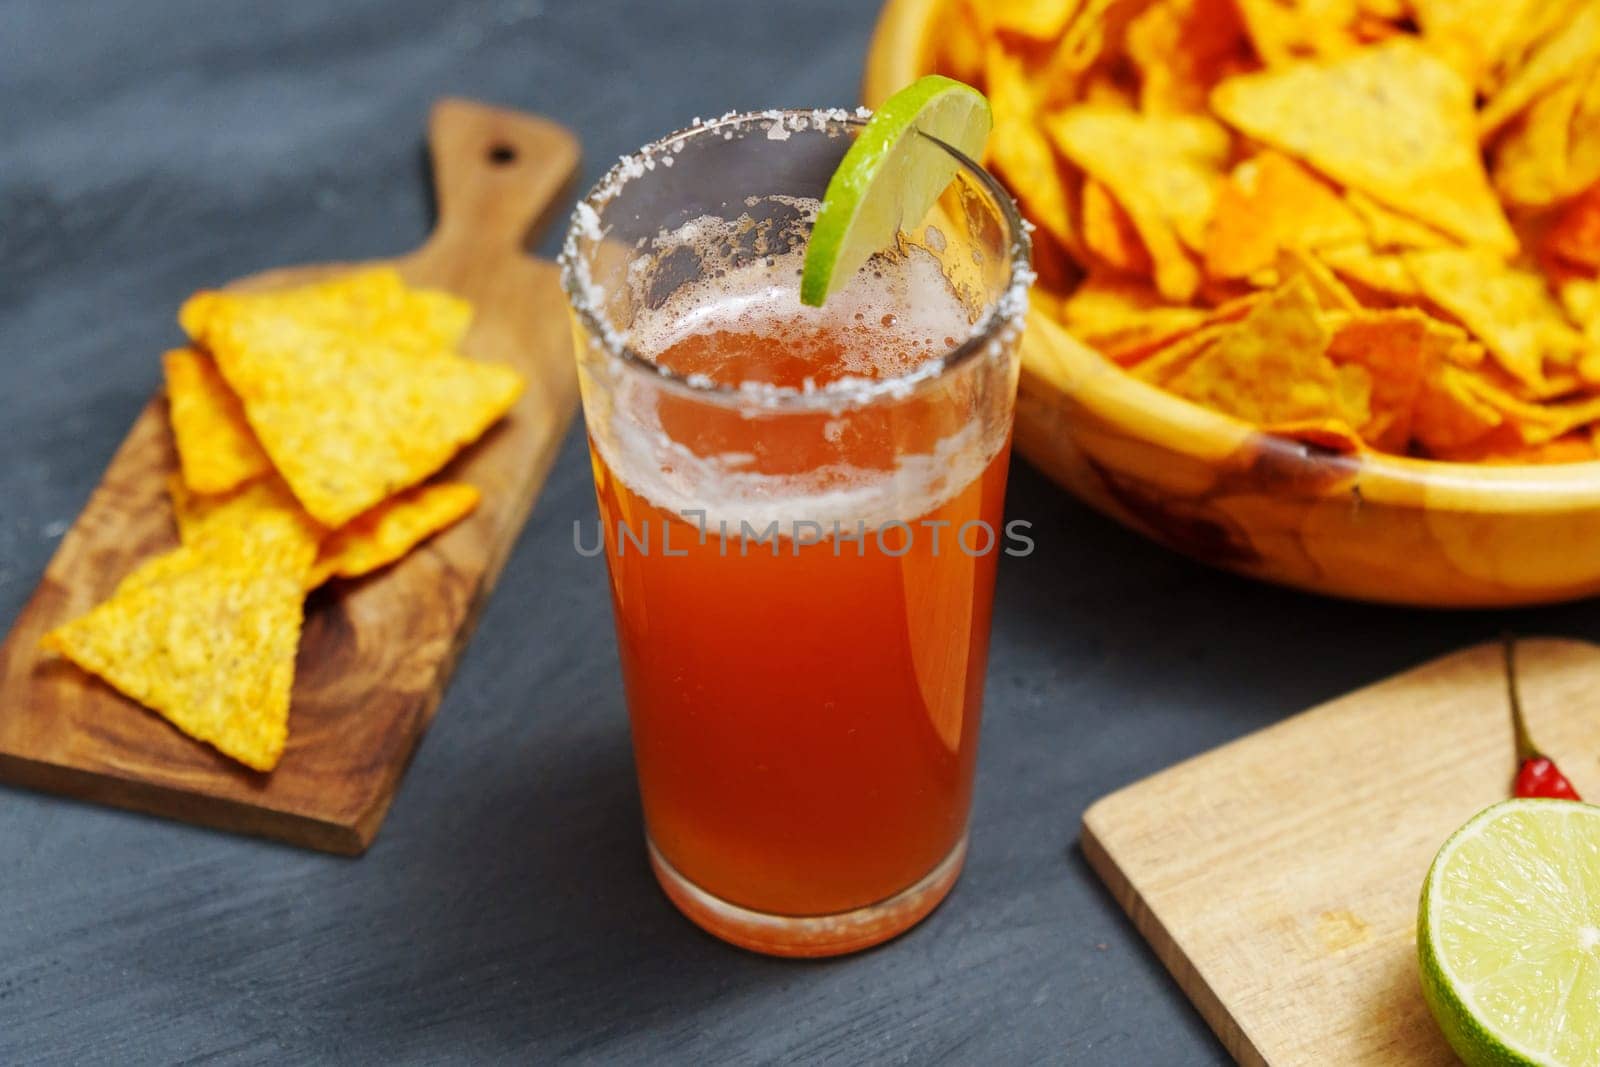 Michelada, Mexican alcoholic cocktail with beer, lime juice, tomato juice